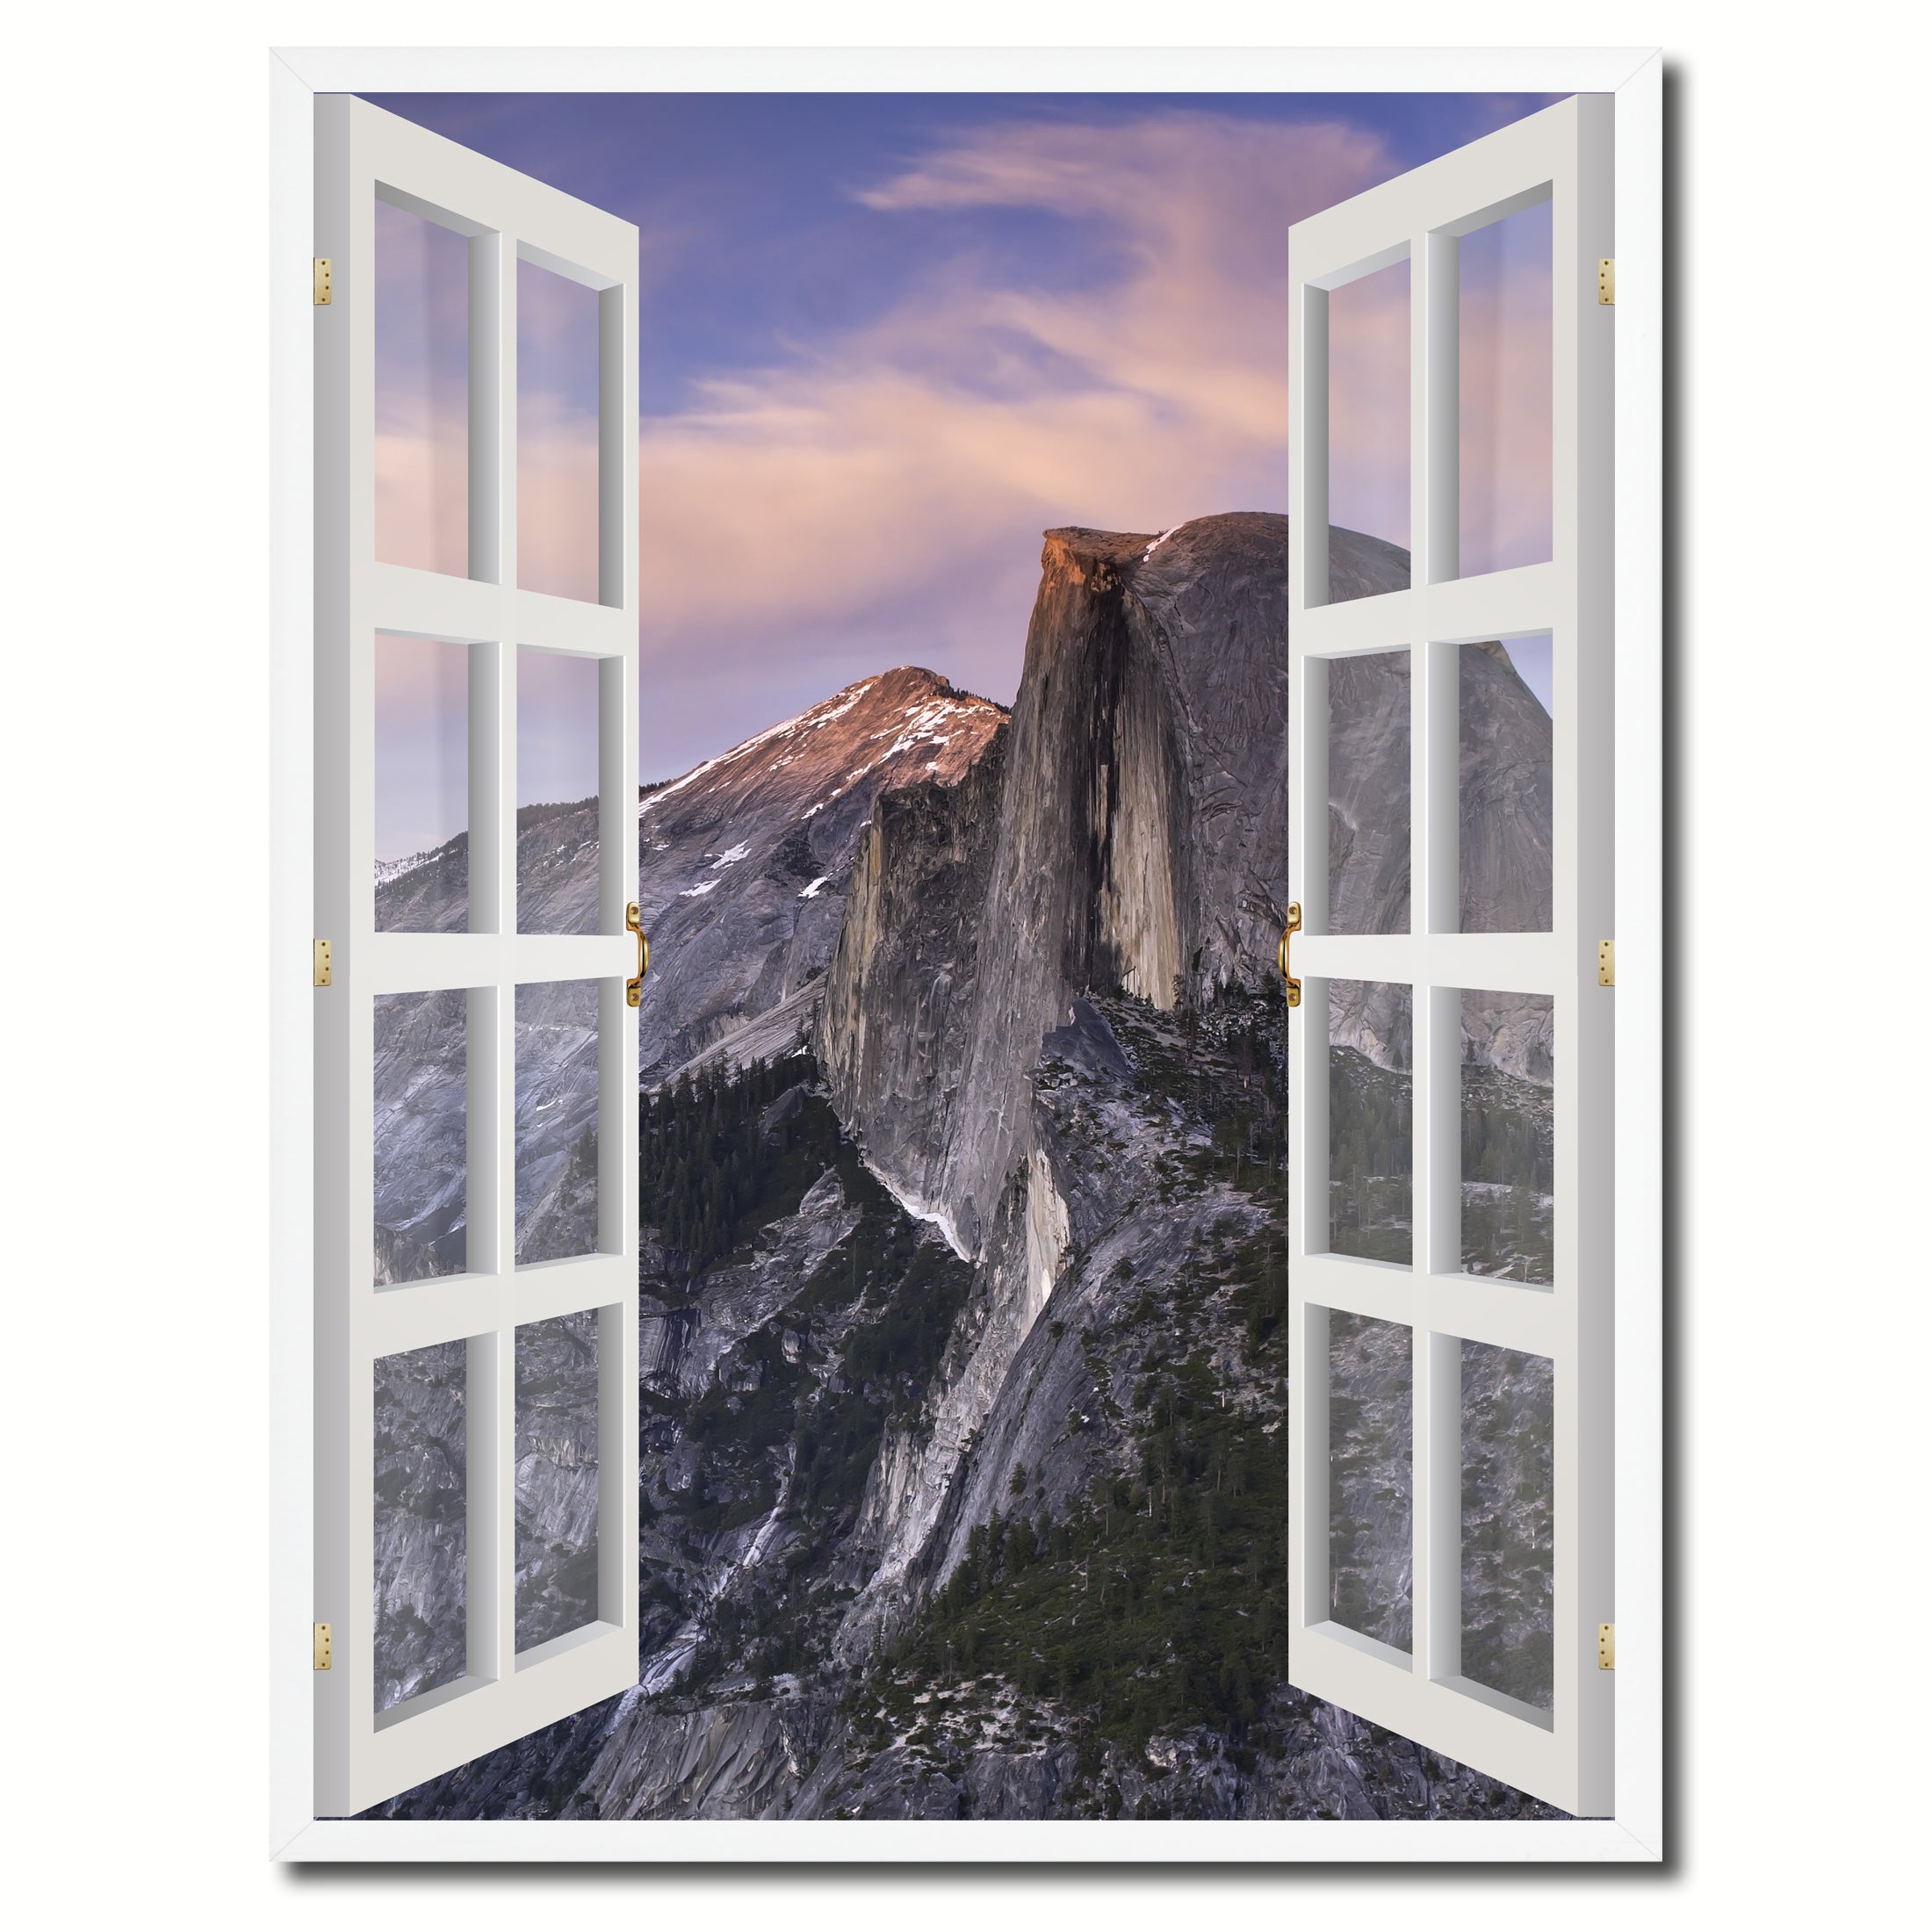 Half Dome Yosemite National Park Picture French Window Canvas Print with Frame Gifts Home Decor Wall Art Collection